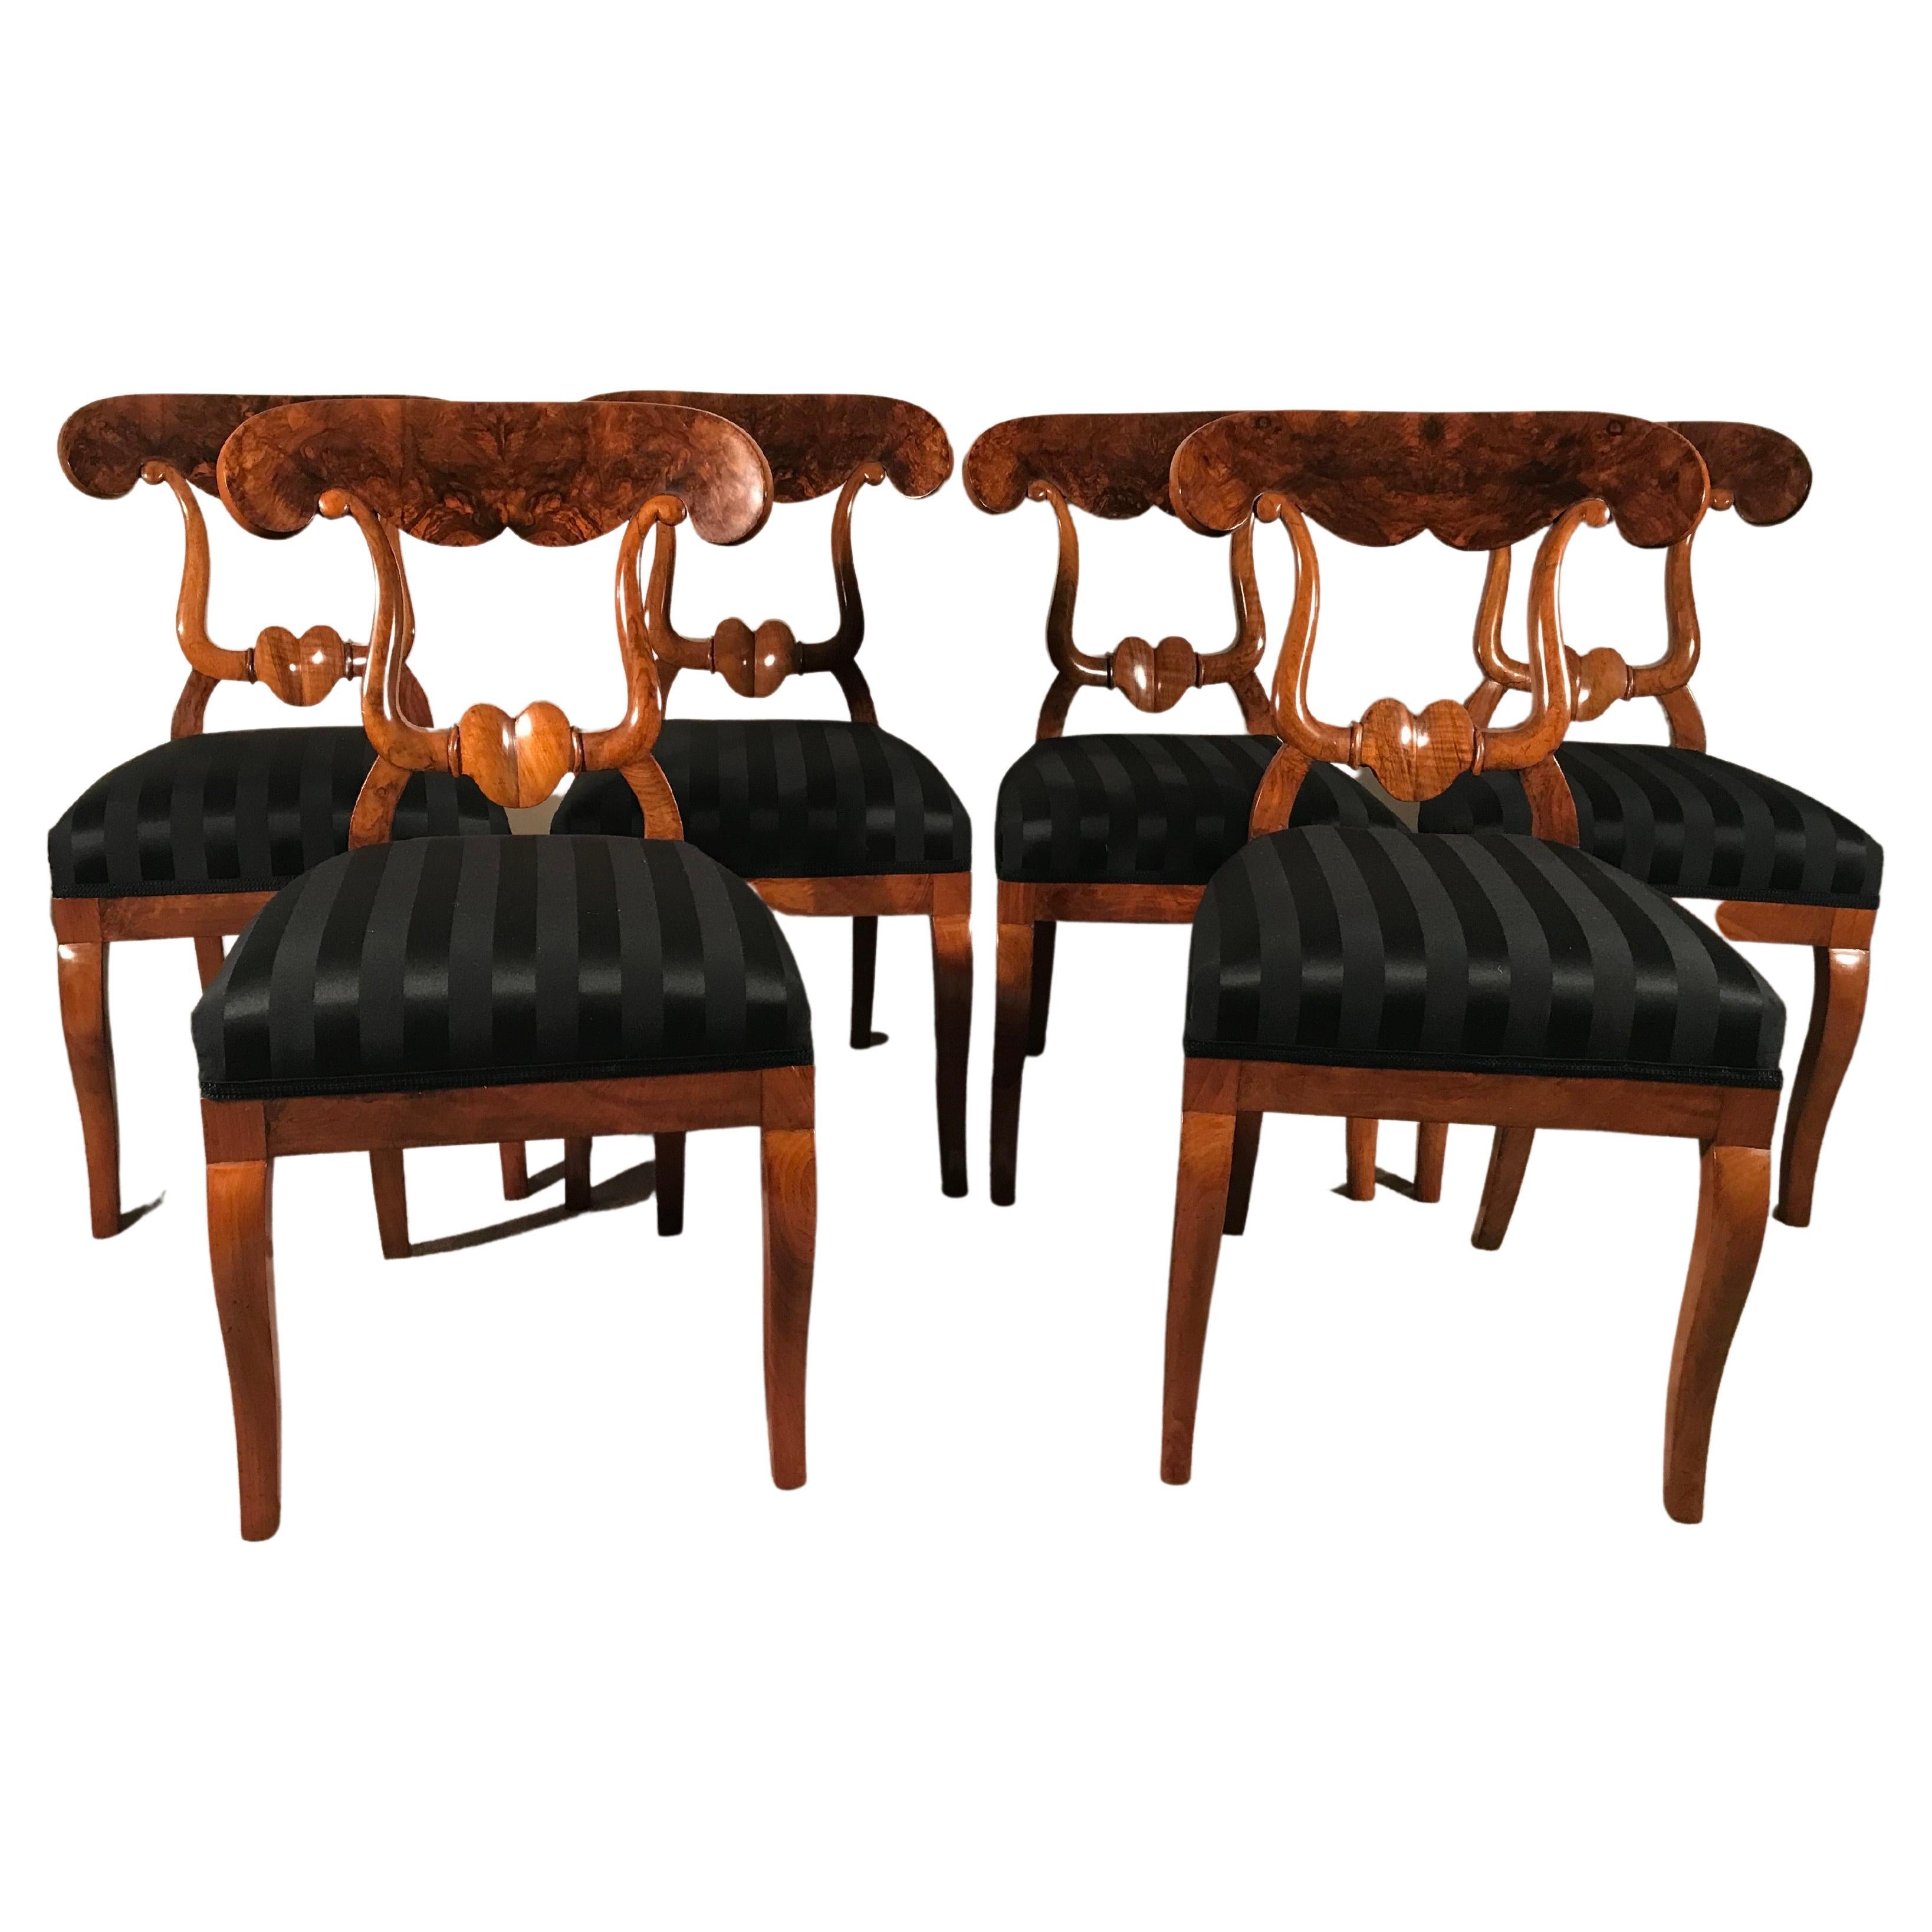 Set of 6 Biedermeier Chairs, South Germany 1820, Walnut In Good Condition For Sale In Belmont, MA